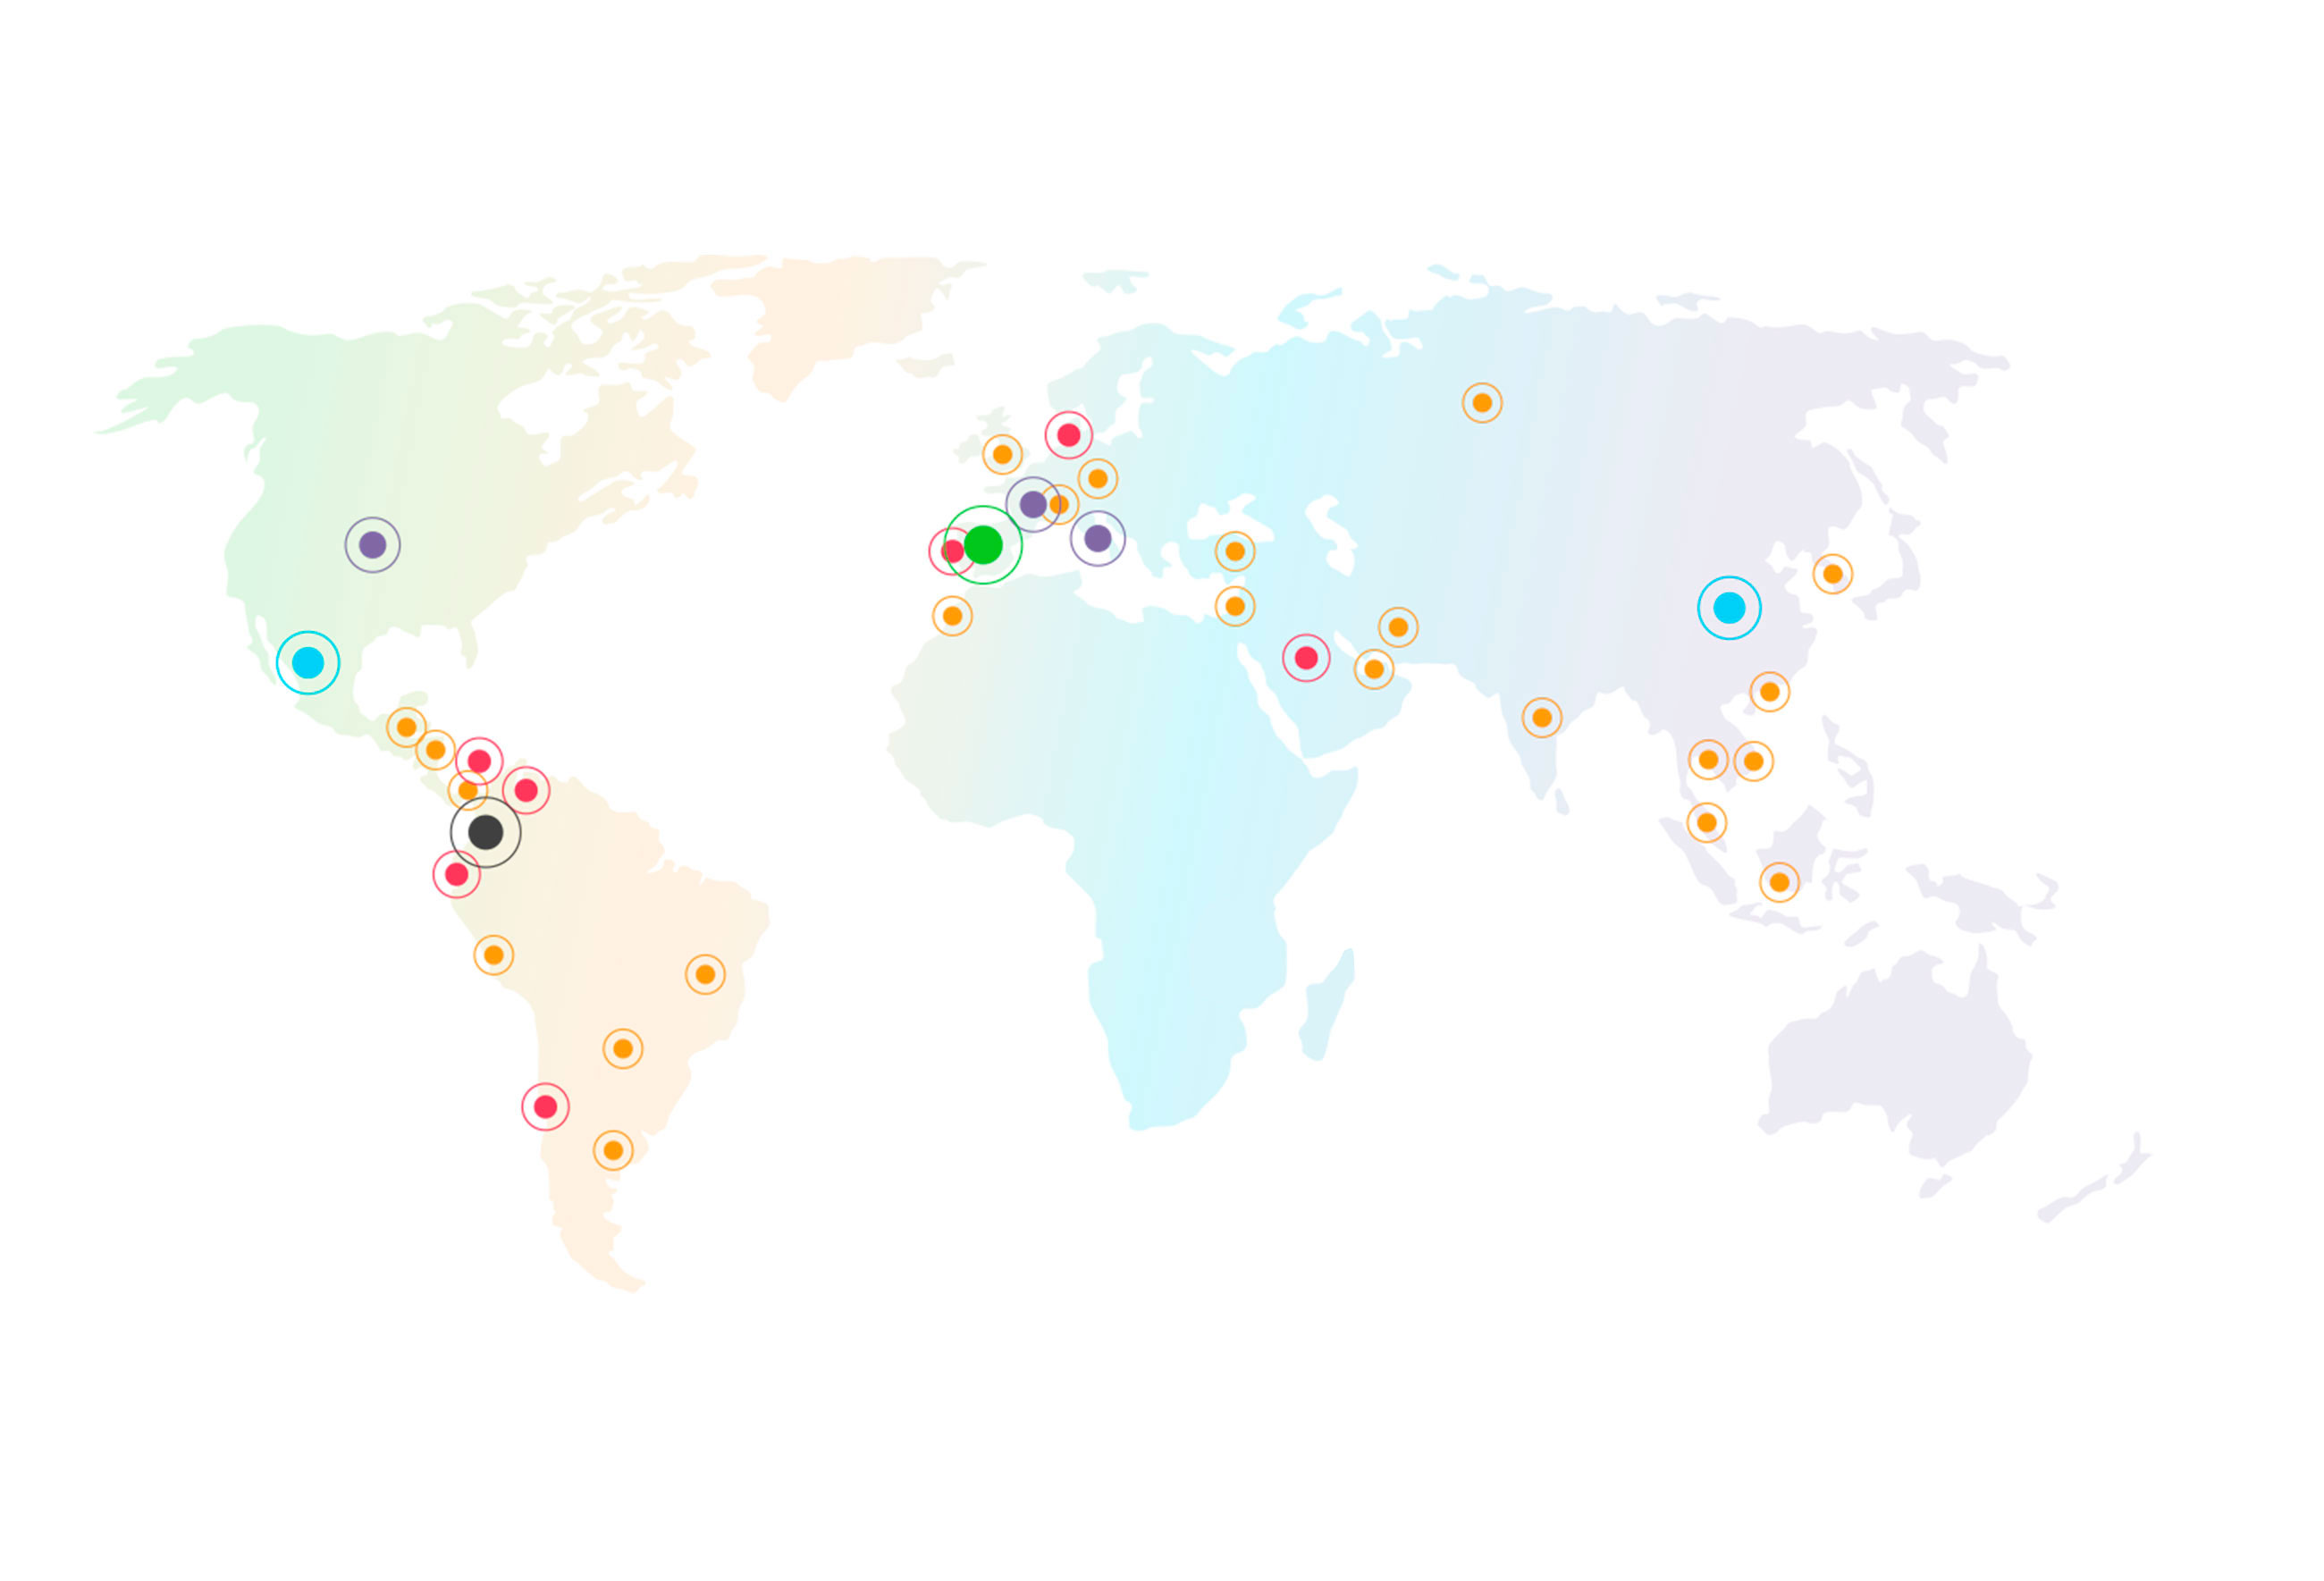 BlinkLearning is present in over 10,000 educational centres across 42 countries